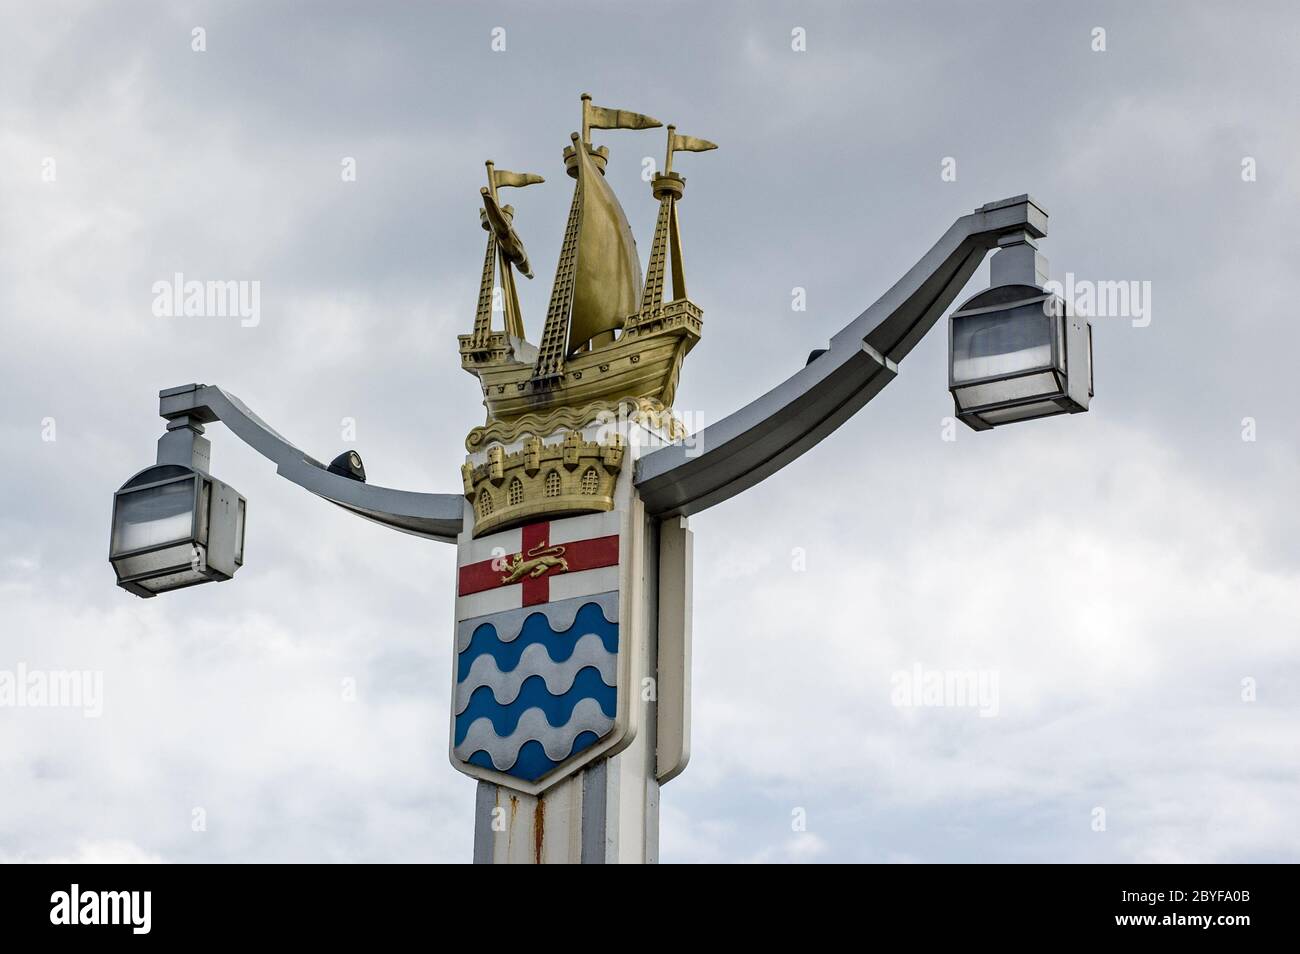 One of the four art deco style lamp posts at the entrances to Chelsea Bridge, London. A golden galleon ship sits on top of the old London County Counc Stock Photo